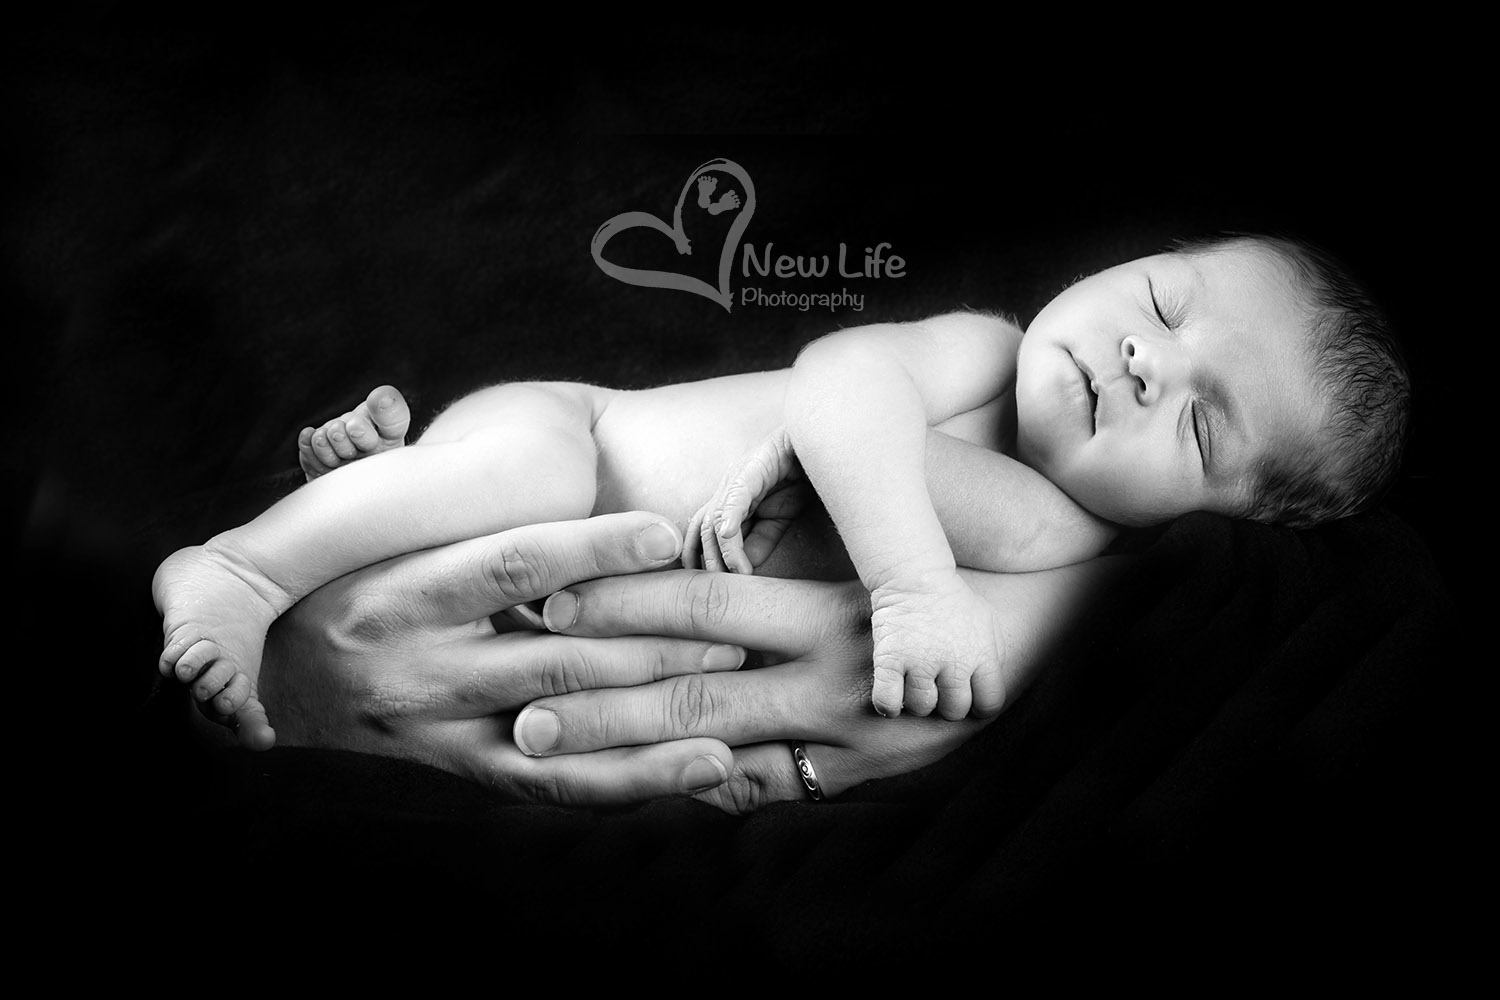 New Life Photography Bienne